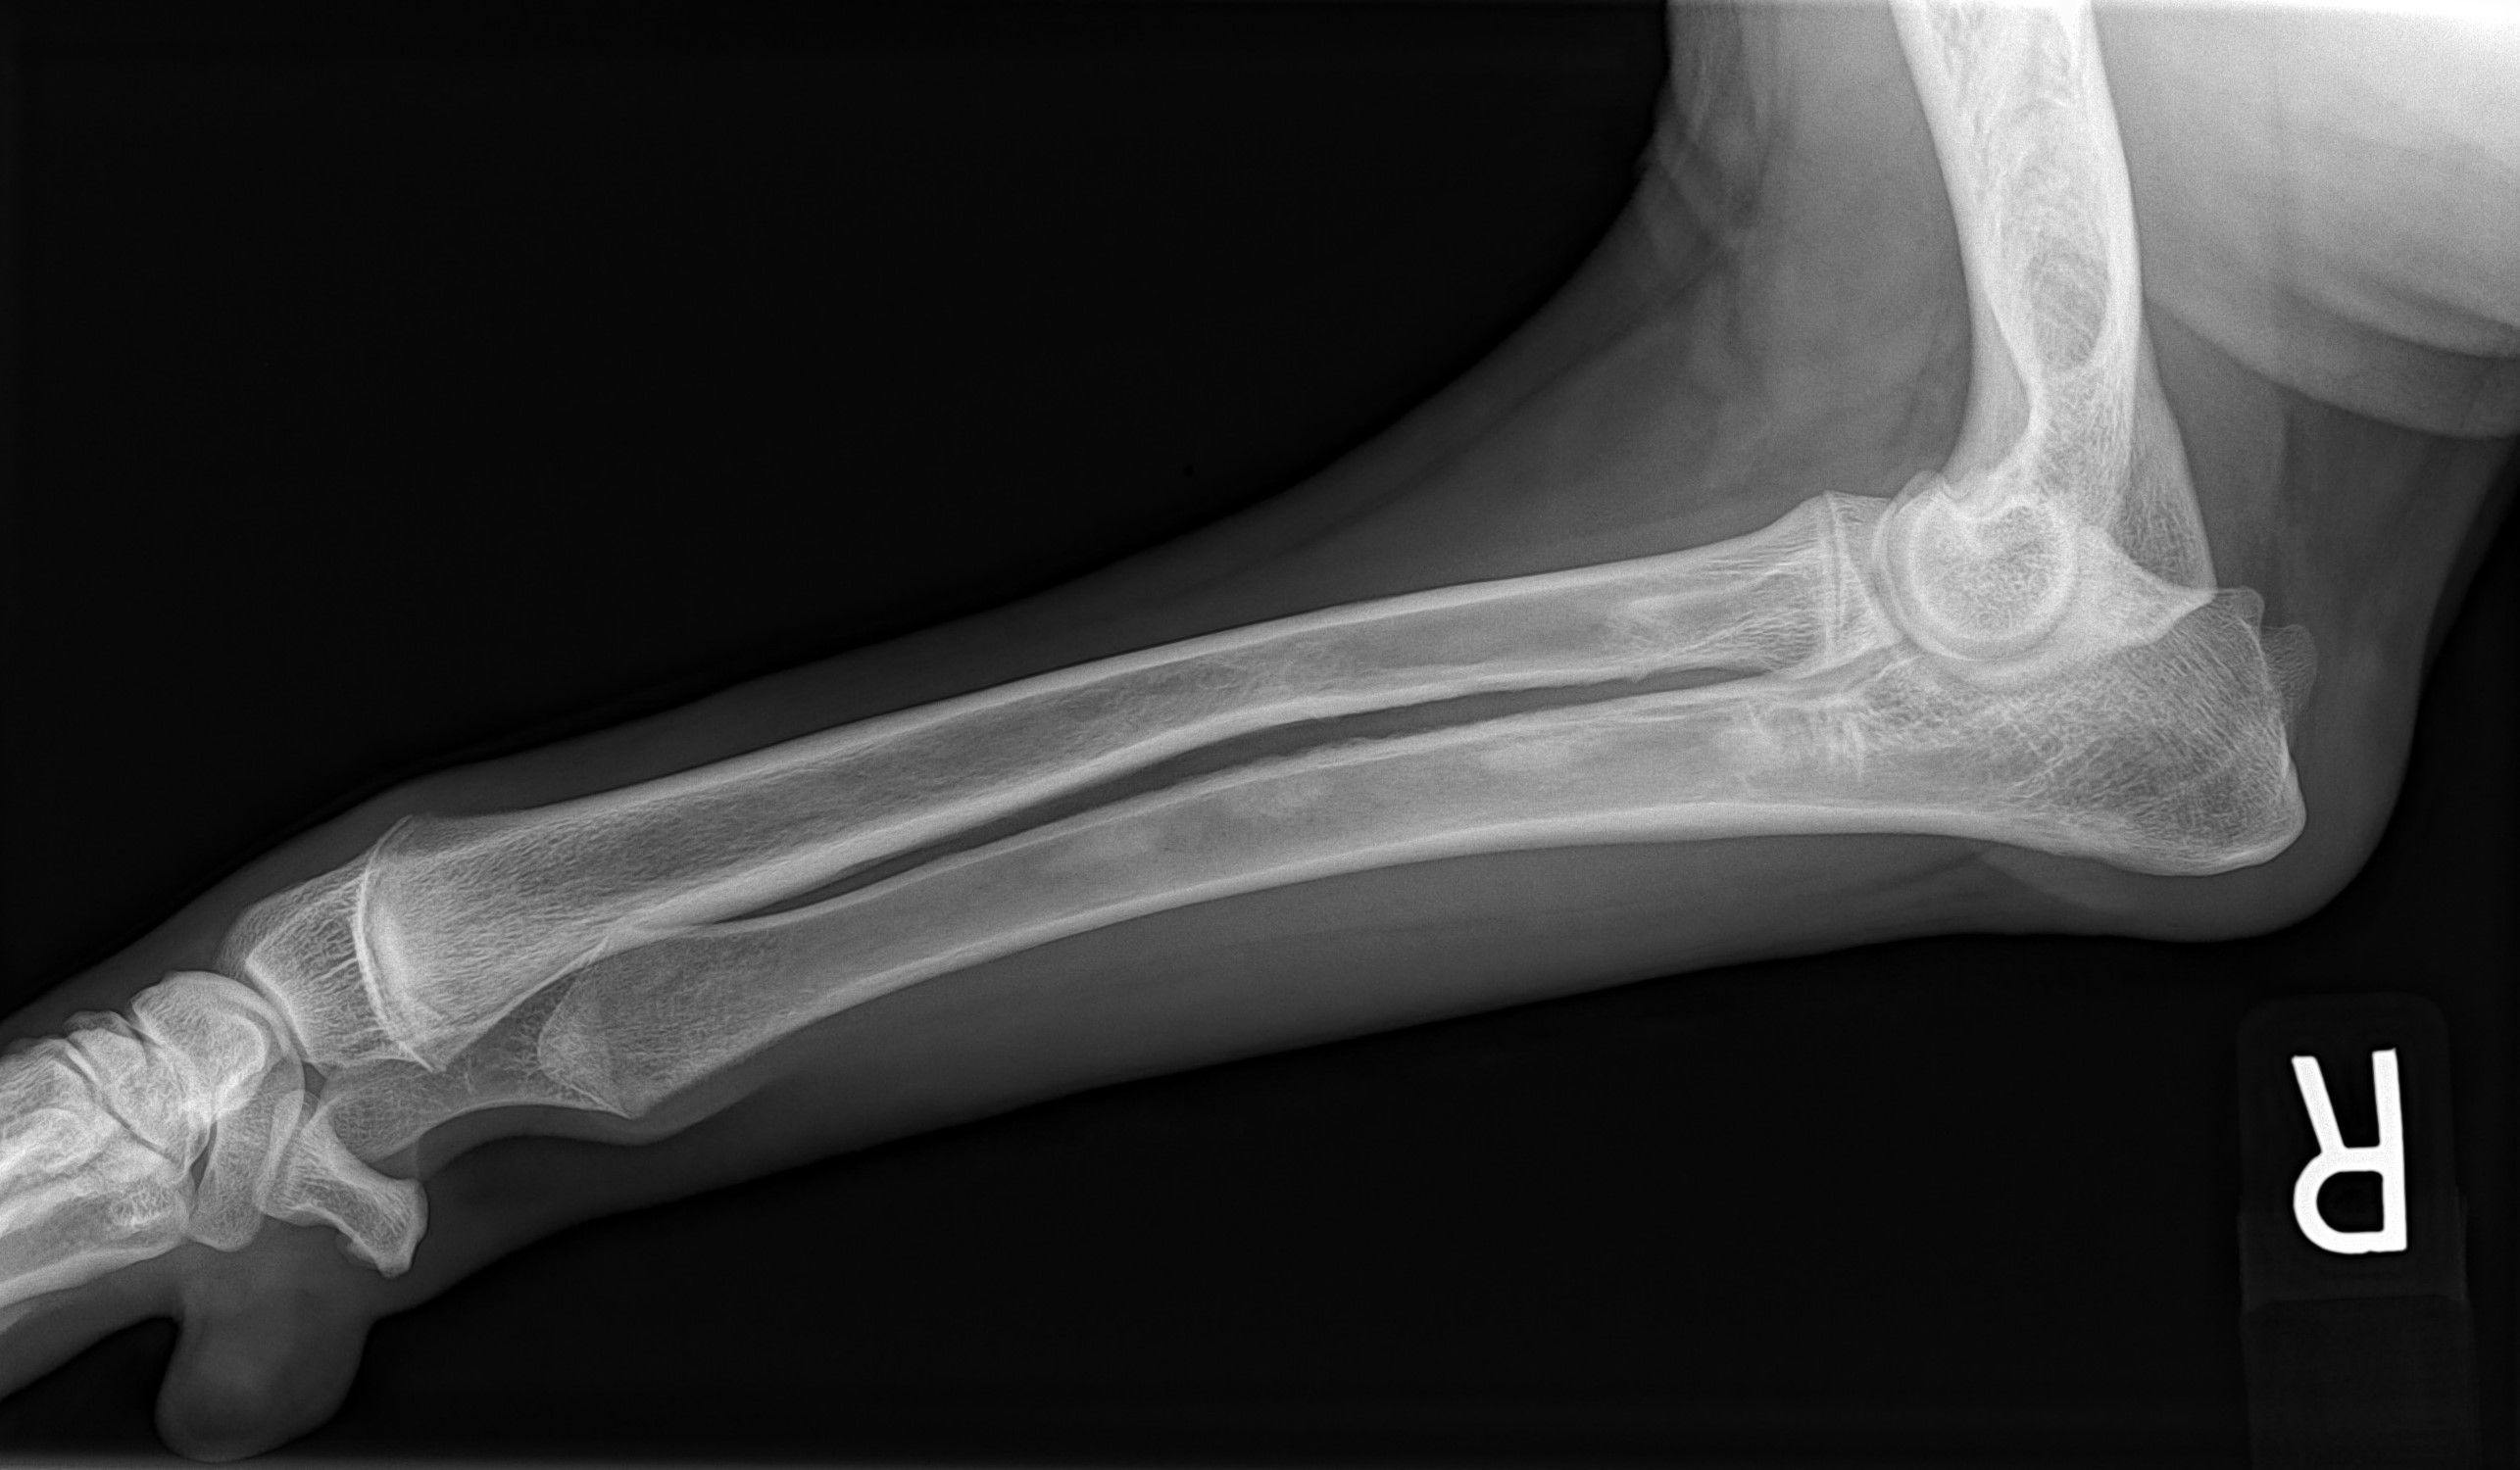 Figure 2. A mediolateral projection of the right radius/ulna belonging to a 10-month-old German Shepherd with a right forelimb lameness diagnosed as panosteitis. In the diaphyseal ulna, and, to a lesser degree, the radius, one can see the patchy regions of increased granular opacity and loss of normal trabecular pattern. There is also subtle increased periosteal reaction along the proximal diaphyseal ulna. (Radiograph courtesy of Jeff Haymaker, VMD)